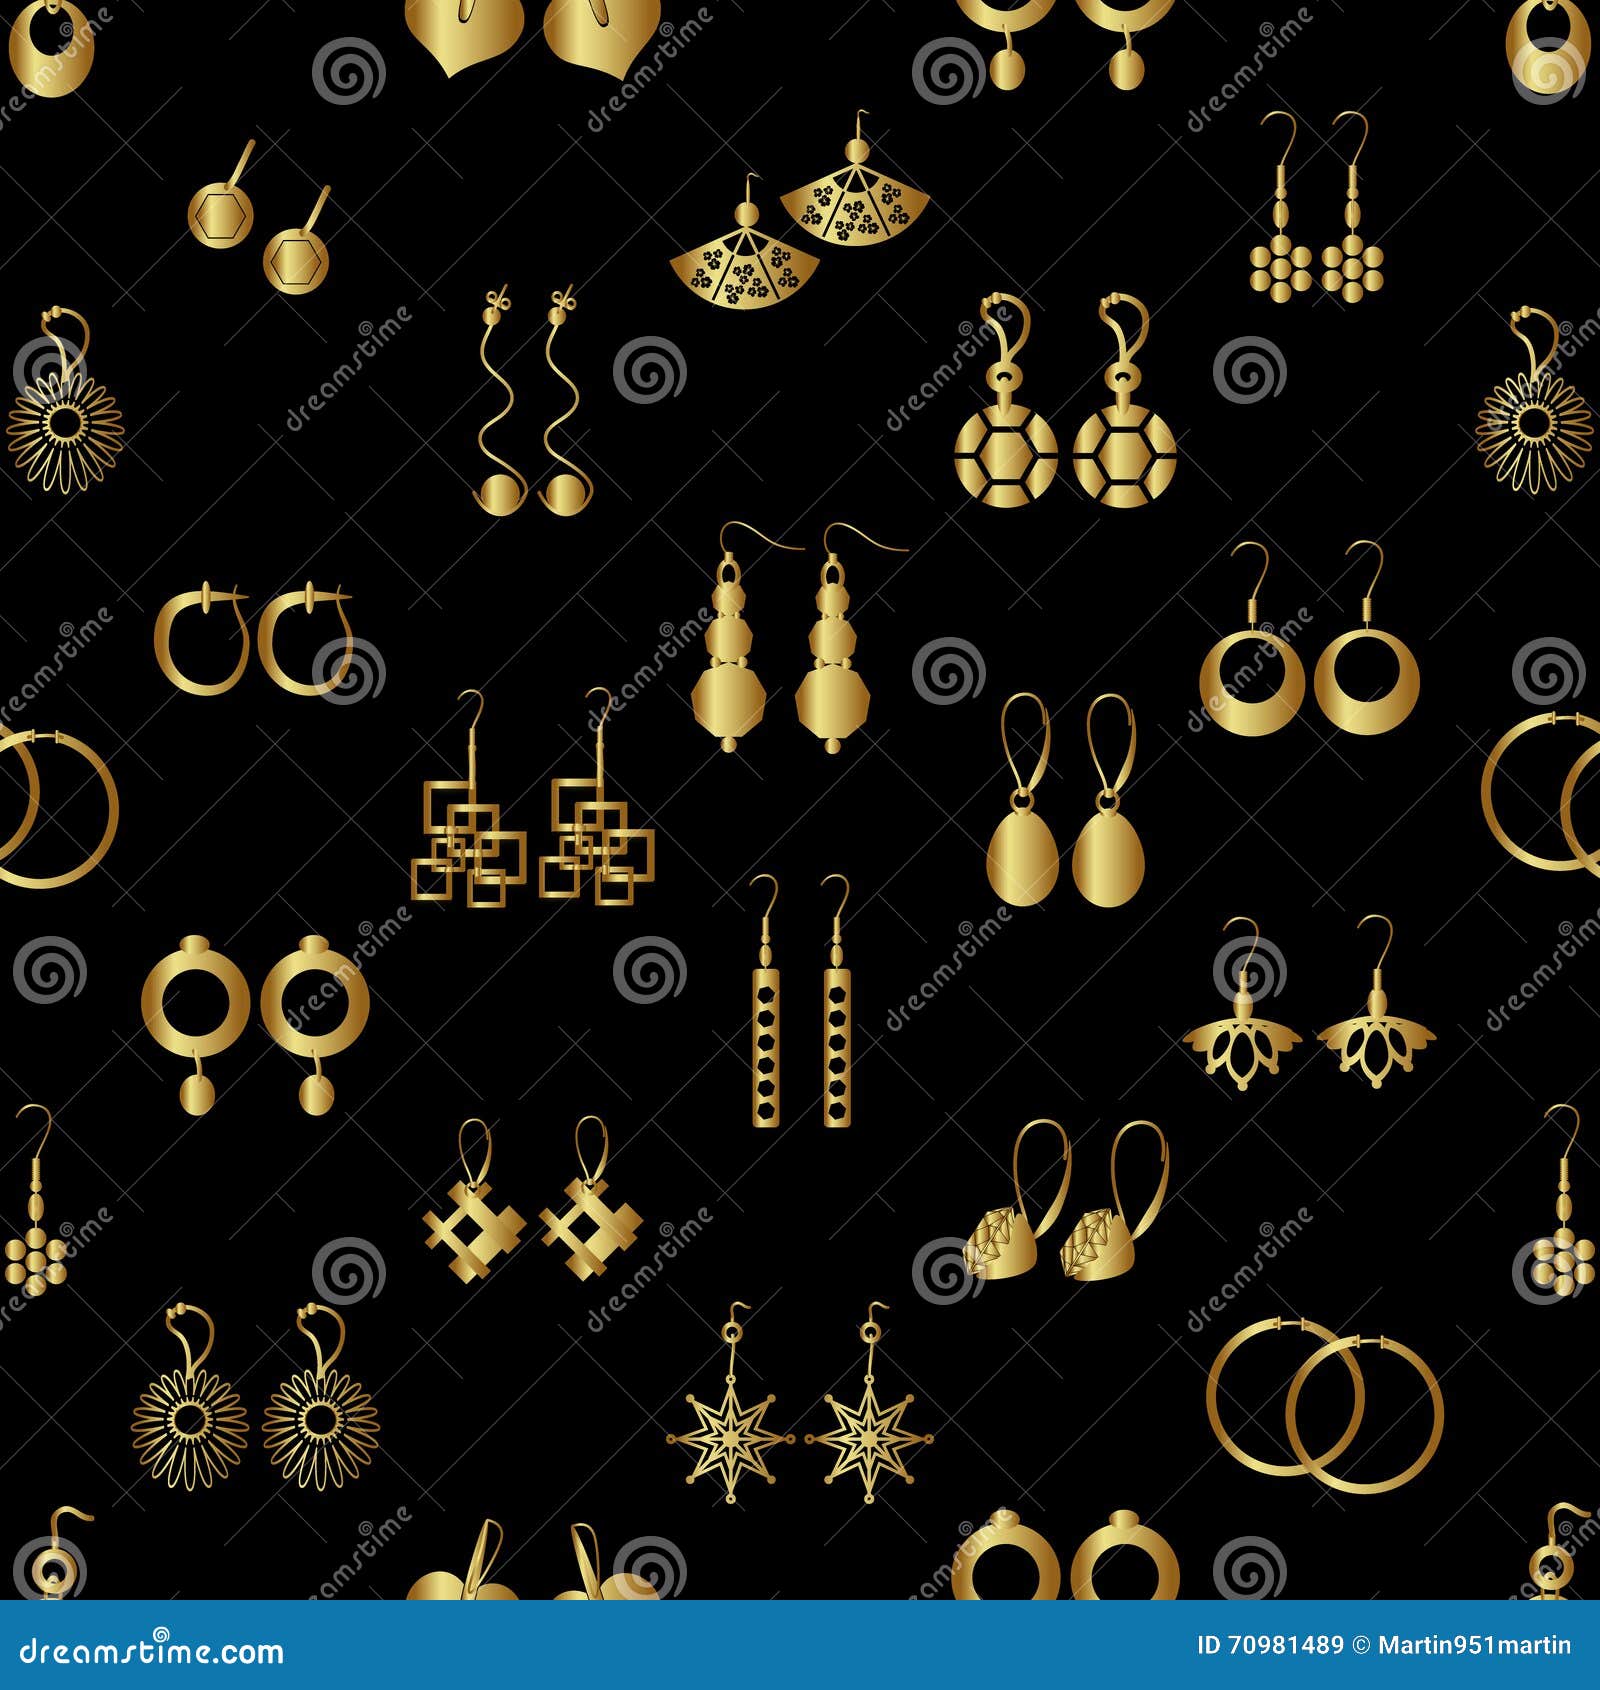 Different Types of Earrings (Infographic) - Mighzal Alarab - Medium